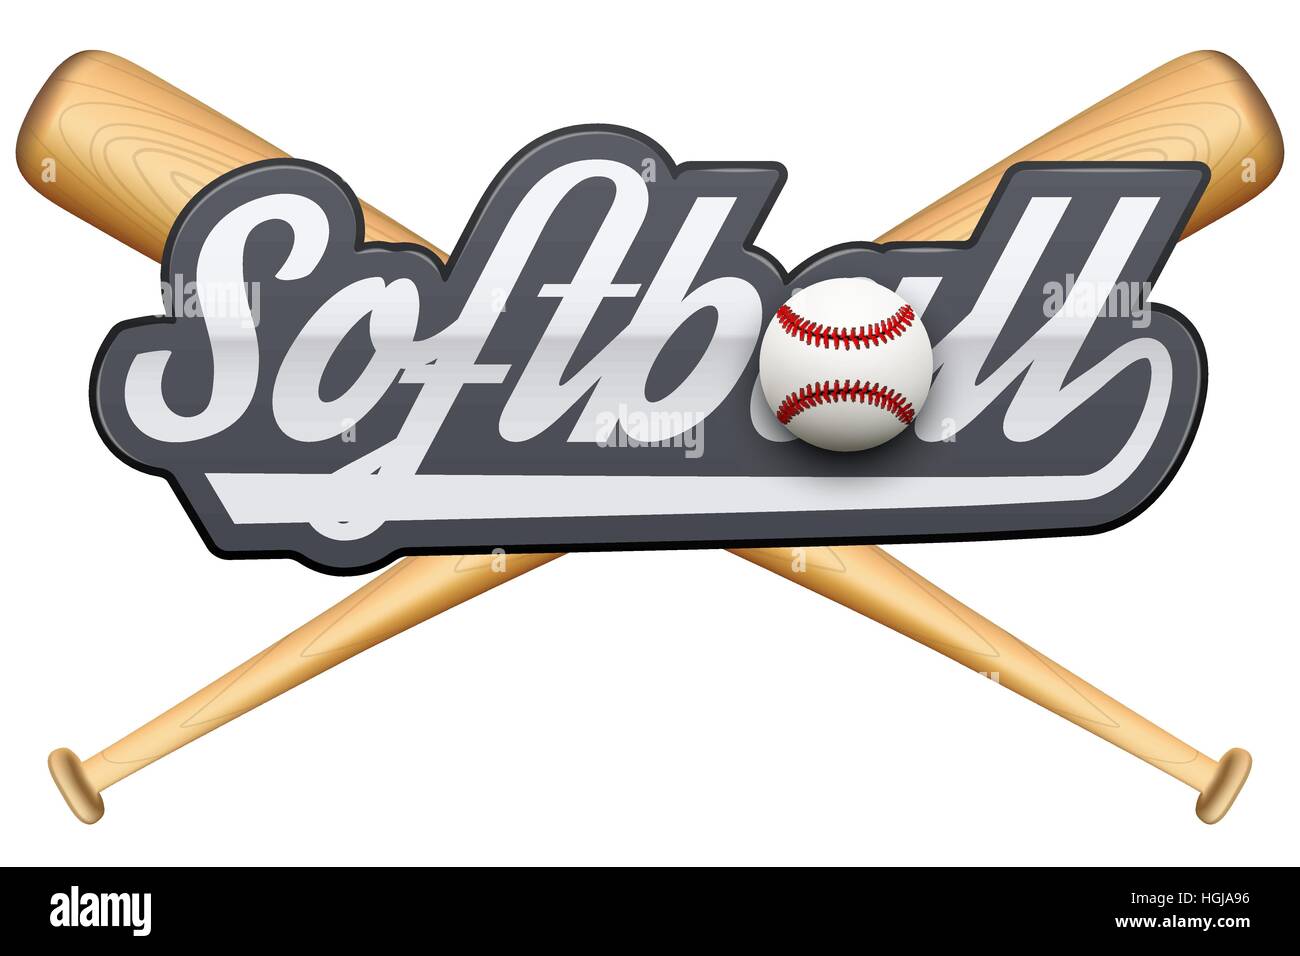 Softball symbol with tag and wooden bats Stock Vector